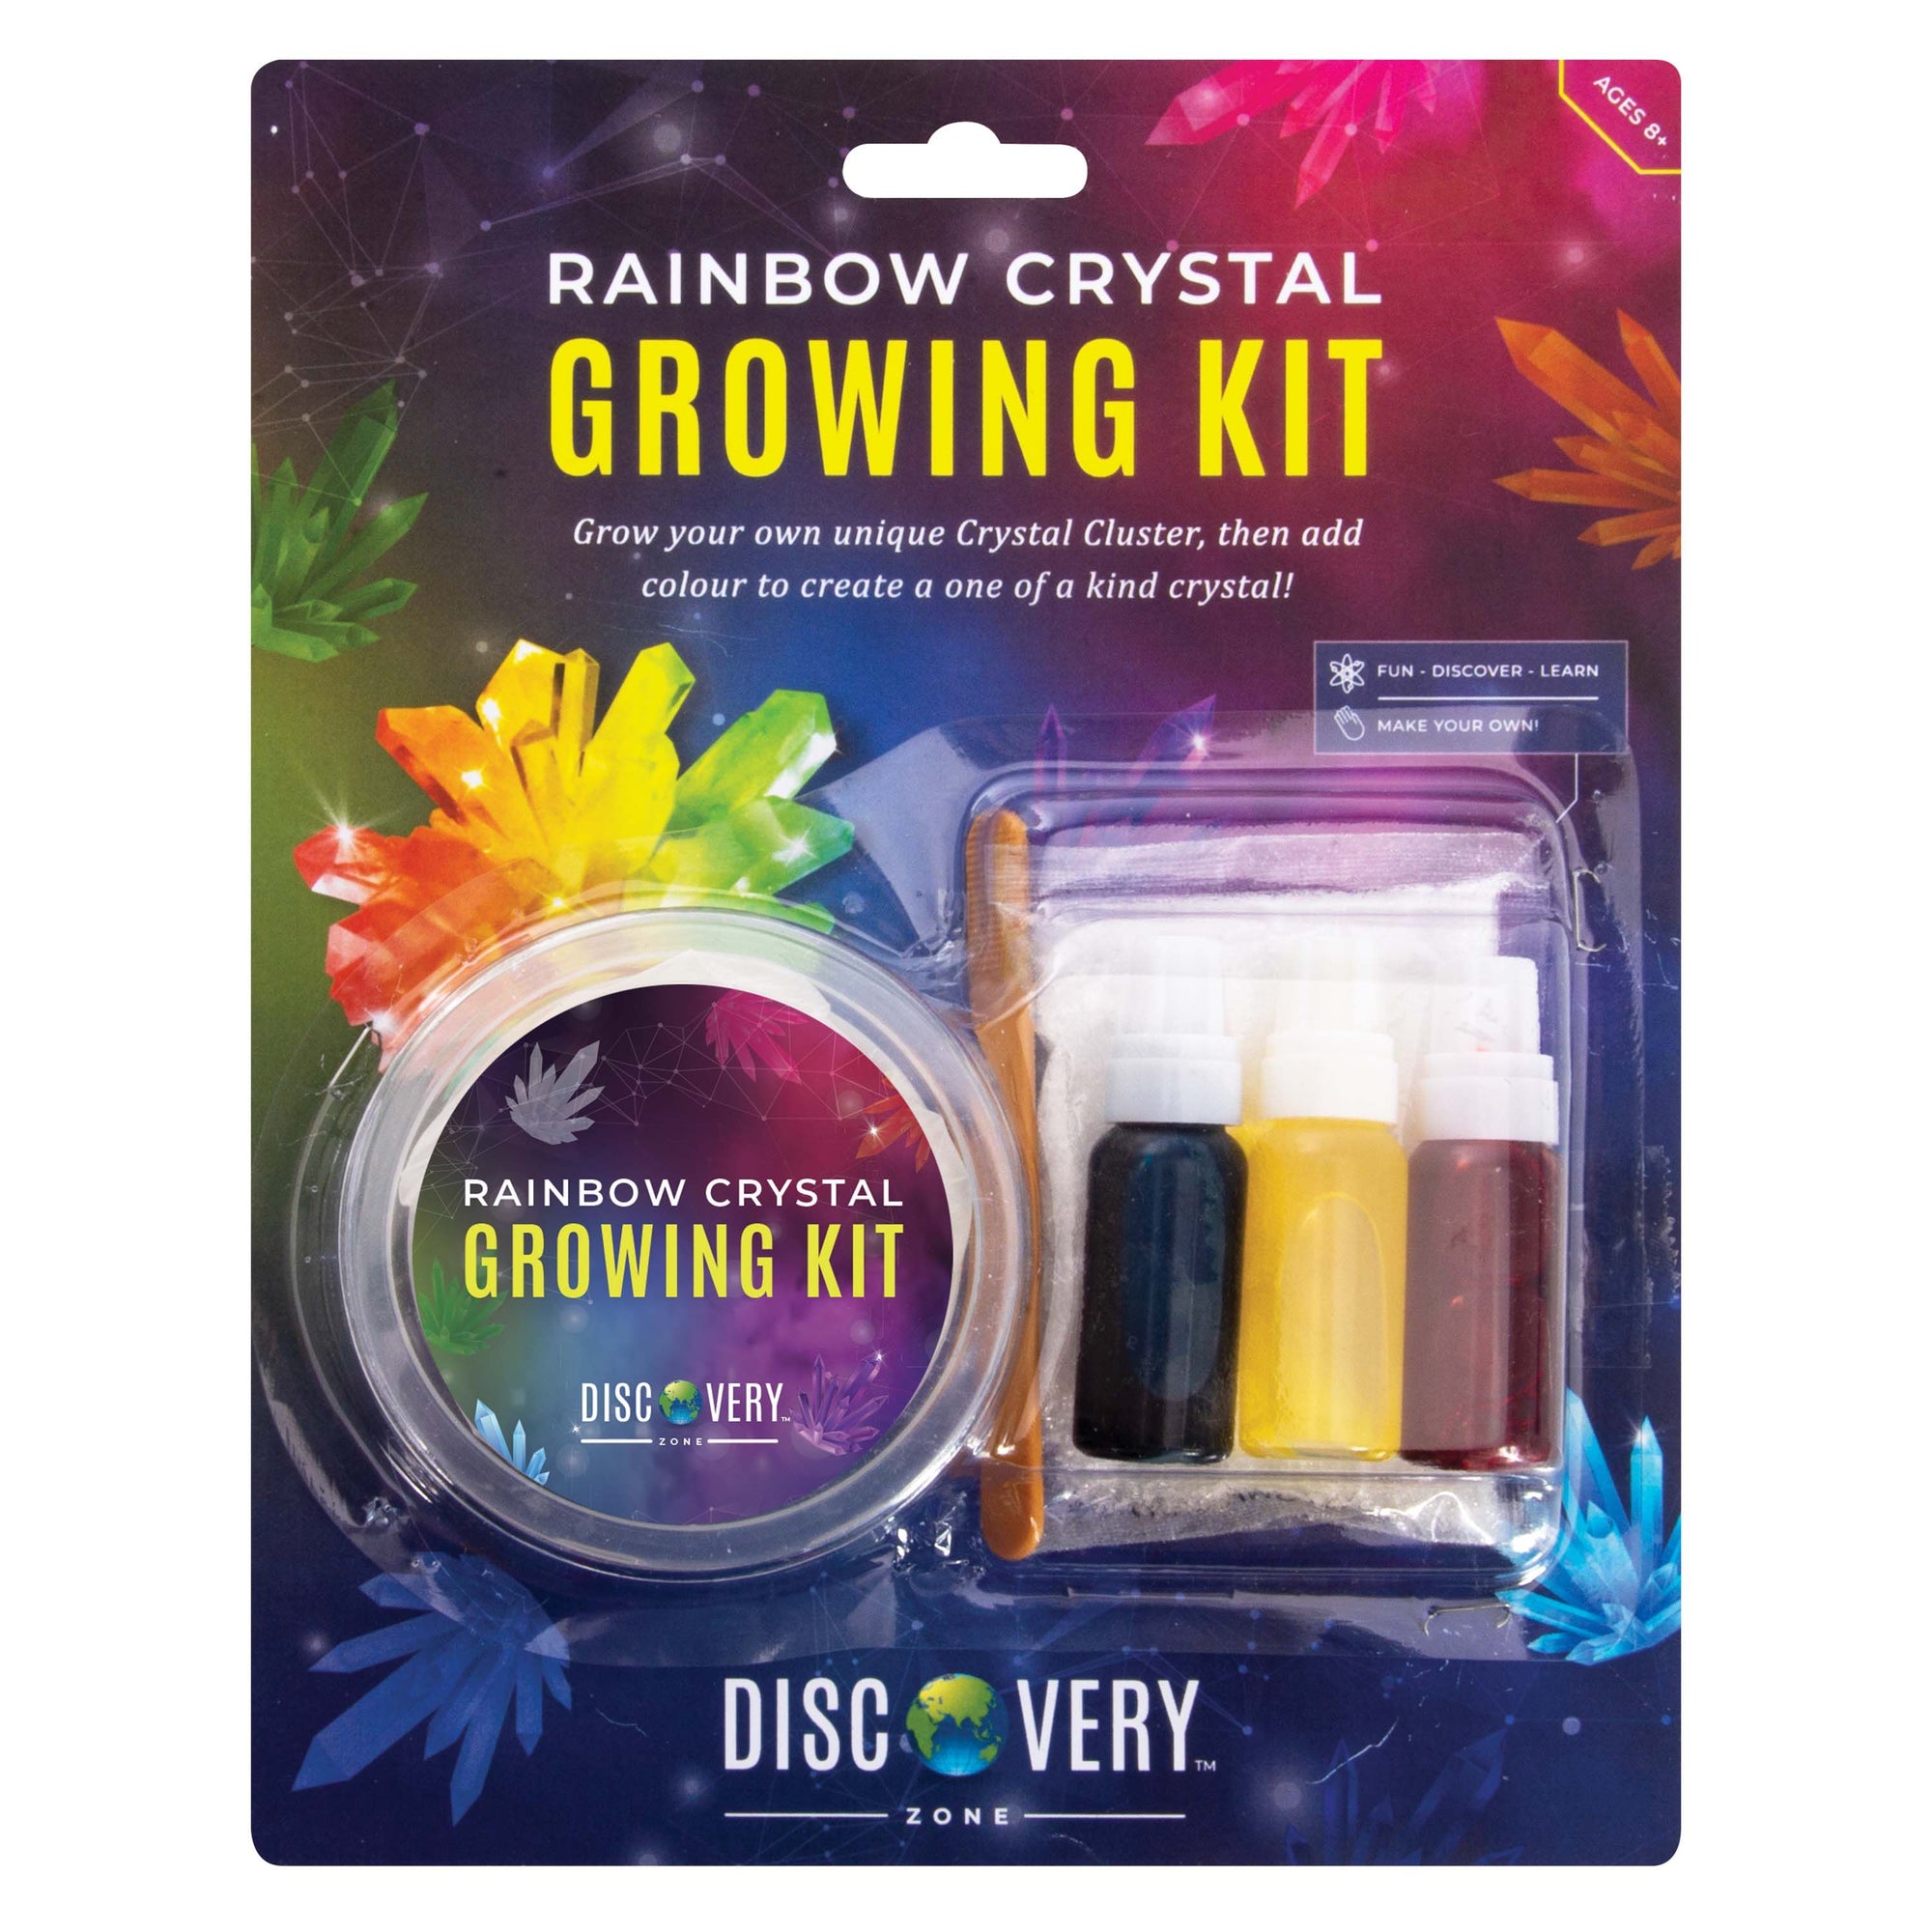 Rainbow Crystal Growing Kit from Discovery Zone